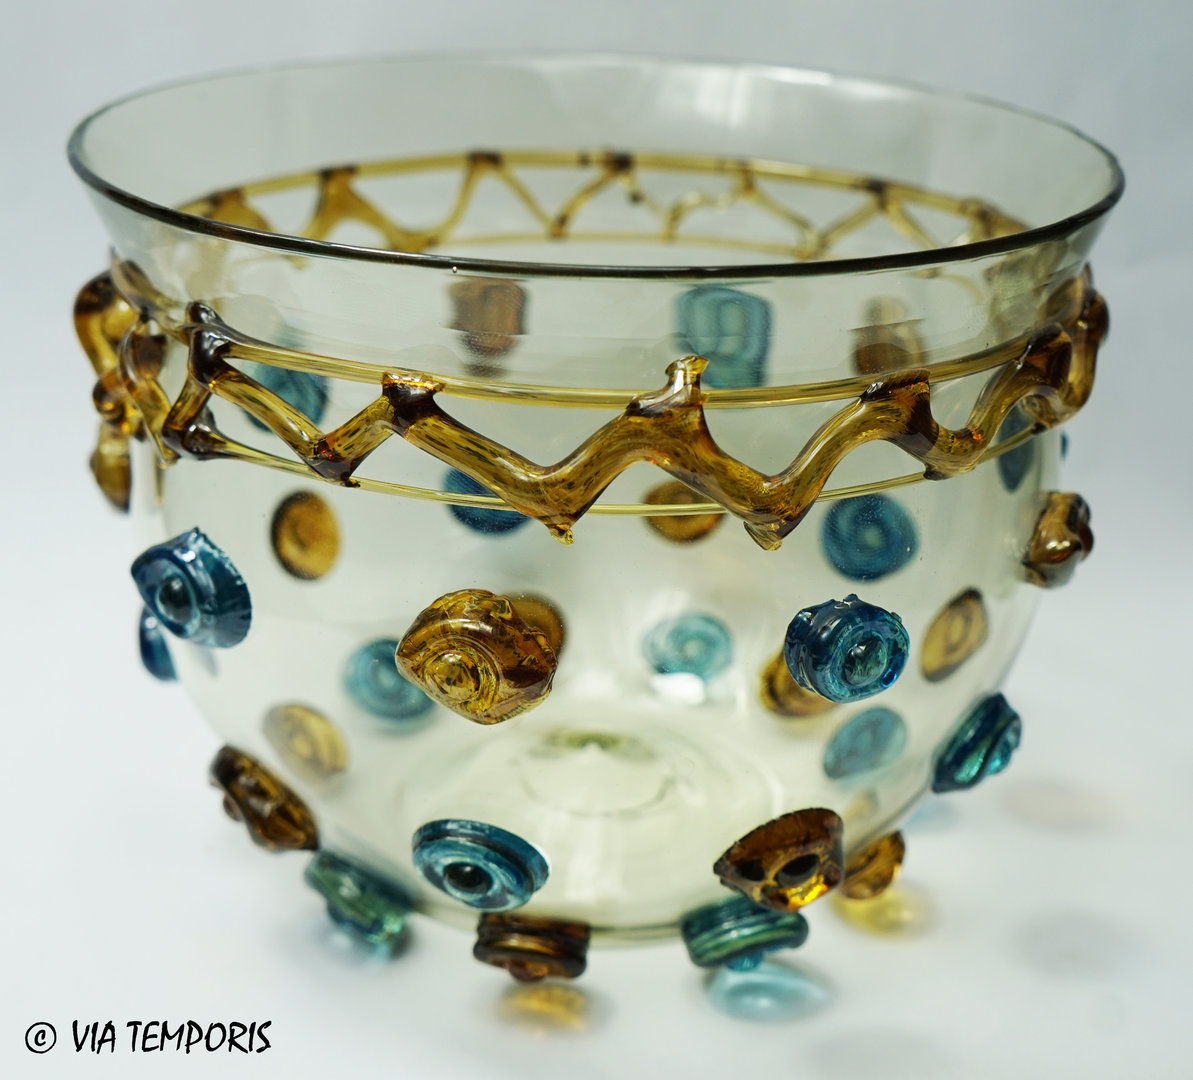 GALLO-ROMAN GLASSWARE - GREAT BOWL WITH COLORED DOTS AND ZIG ZAG LINES